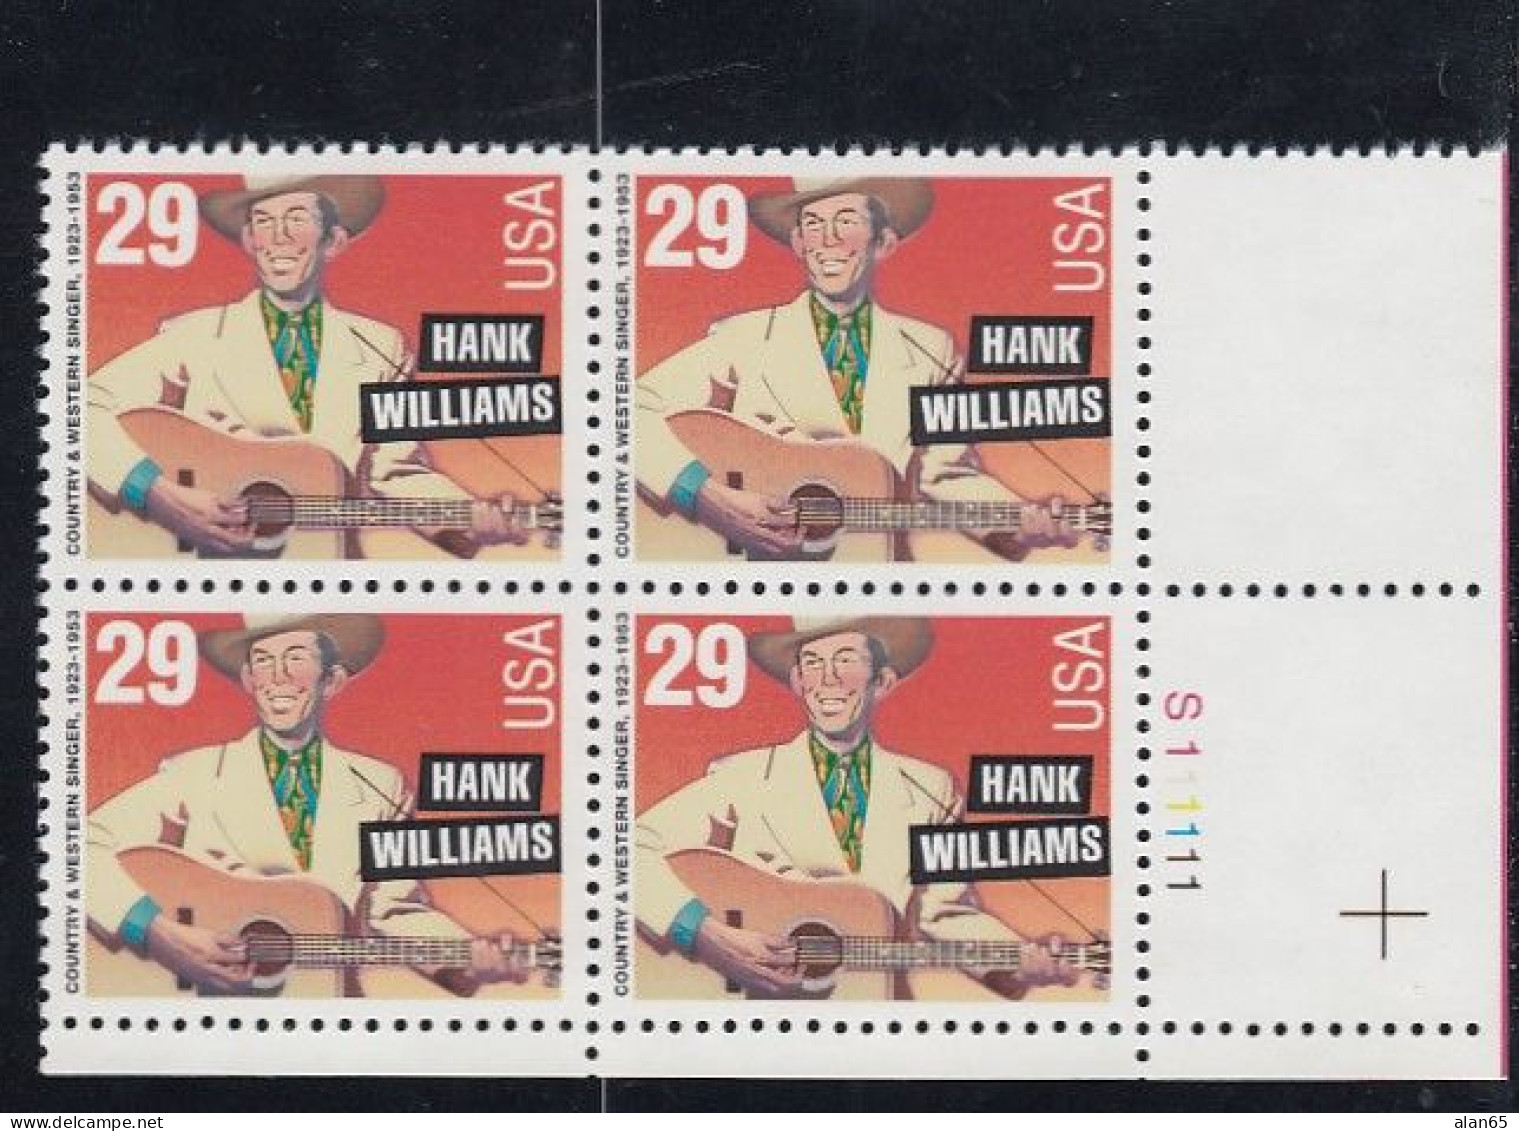 Sc#2723, Hank Williams Country Music Singer Composer, Musical Series, 29-cent Plate Number Block Of 4 MNH Stamps - Plate Blocks & Sheetlets